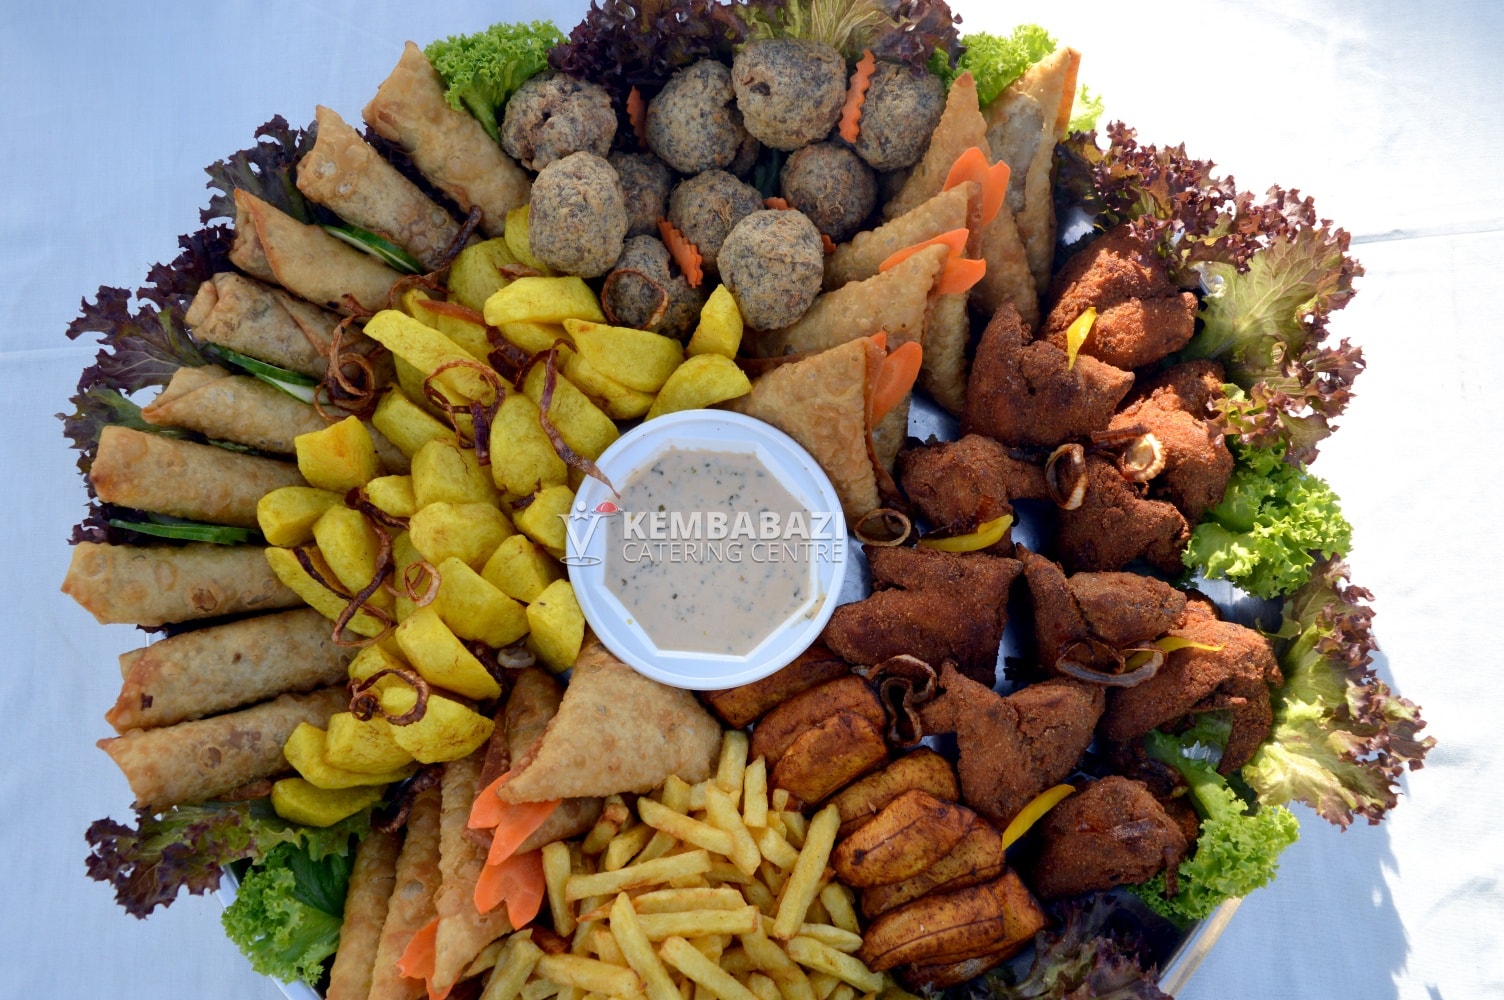 Kembabazi Catering Centre